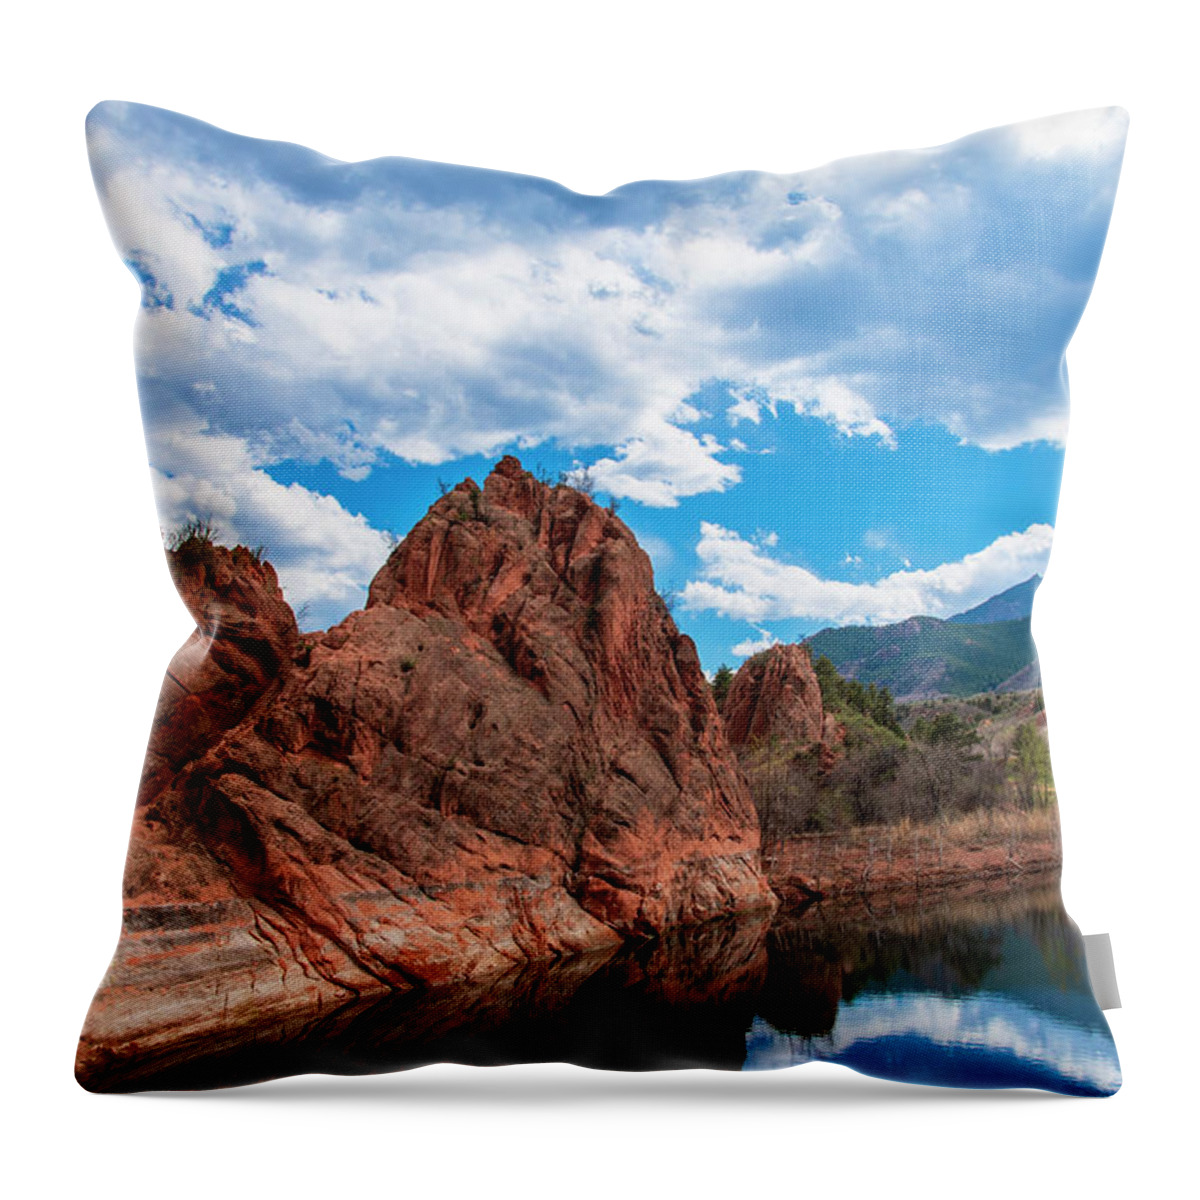 Mountain Throw Pillow featuring the photograph Red Rock by William Pullaro Jr